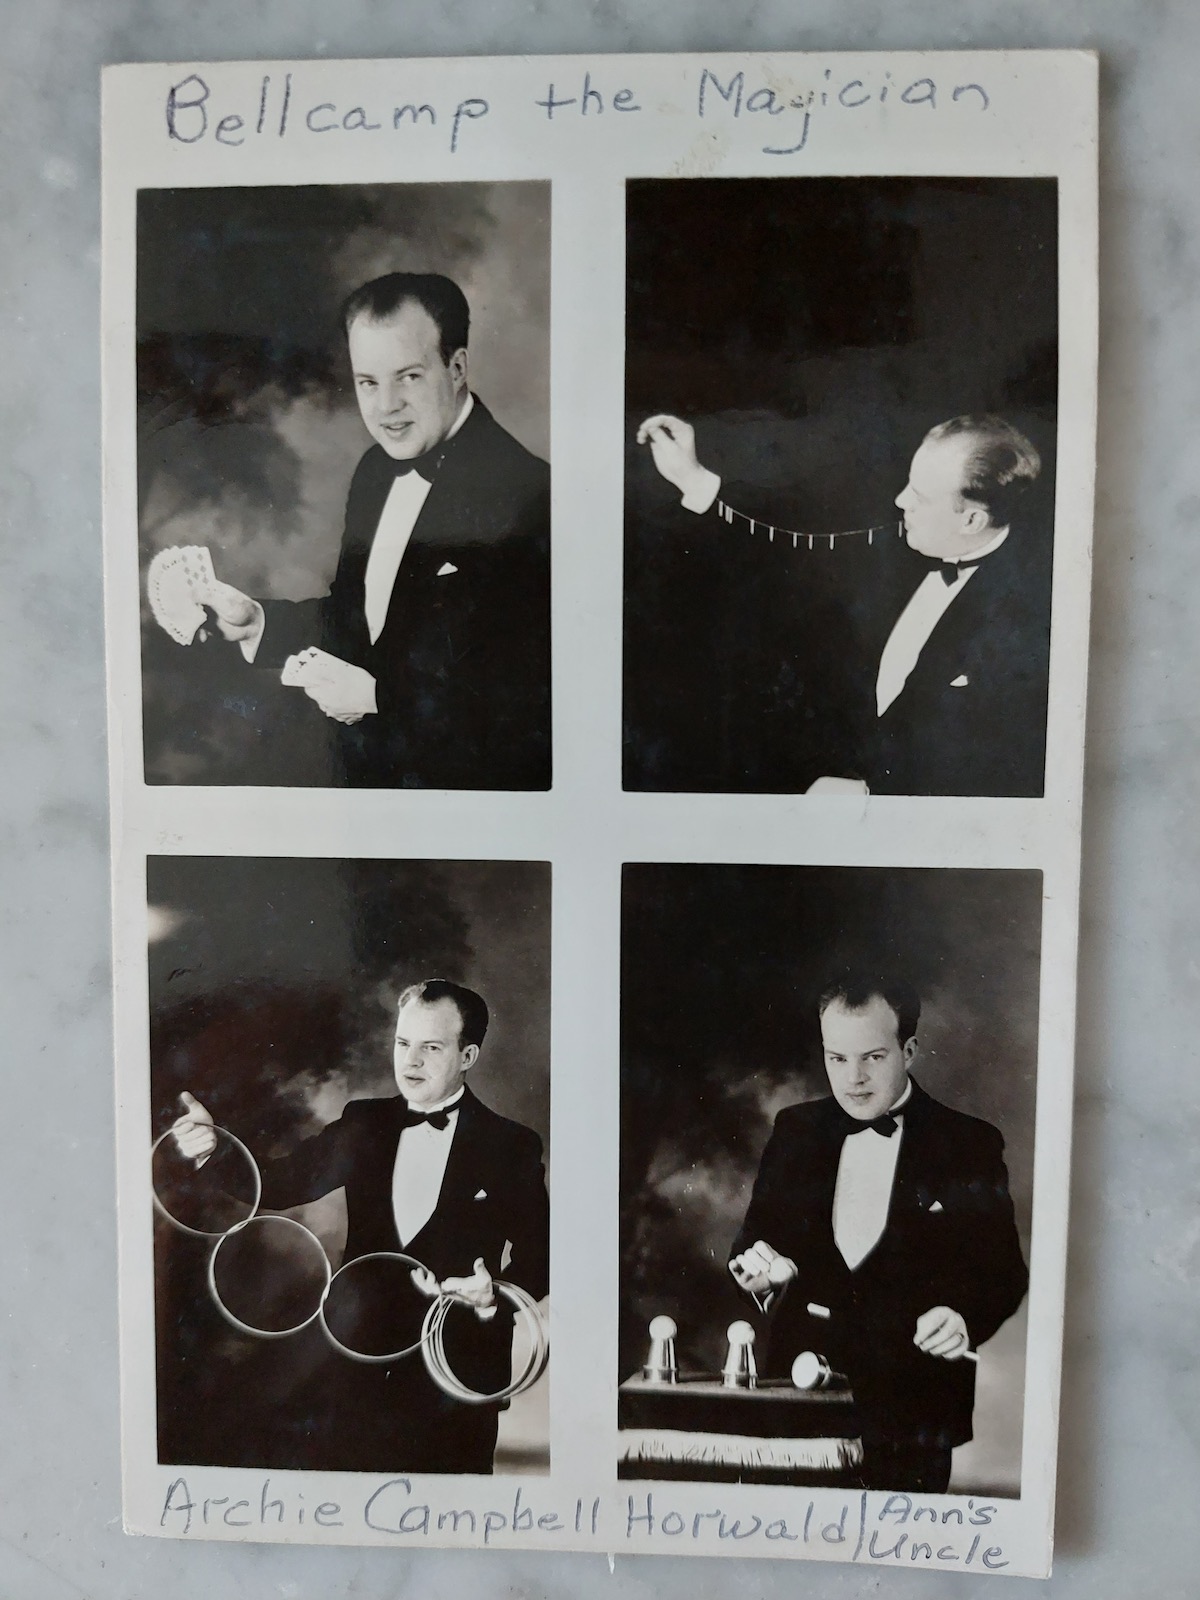 Promotional postcard of Bellcamp the Magician